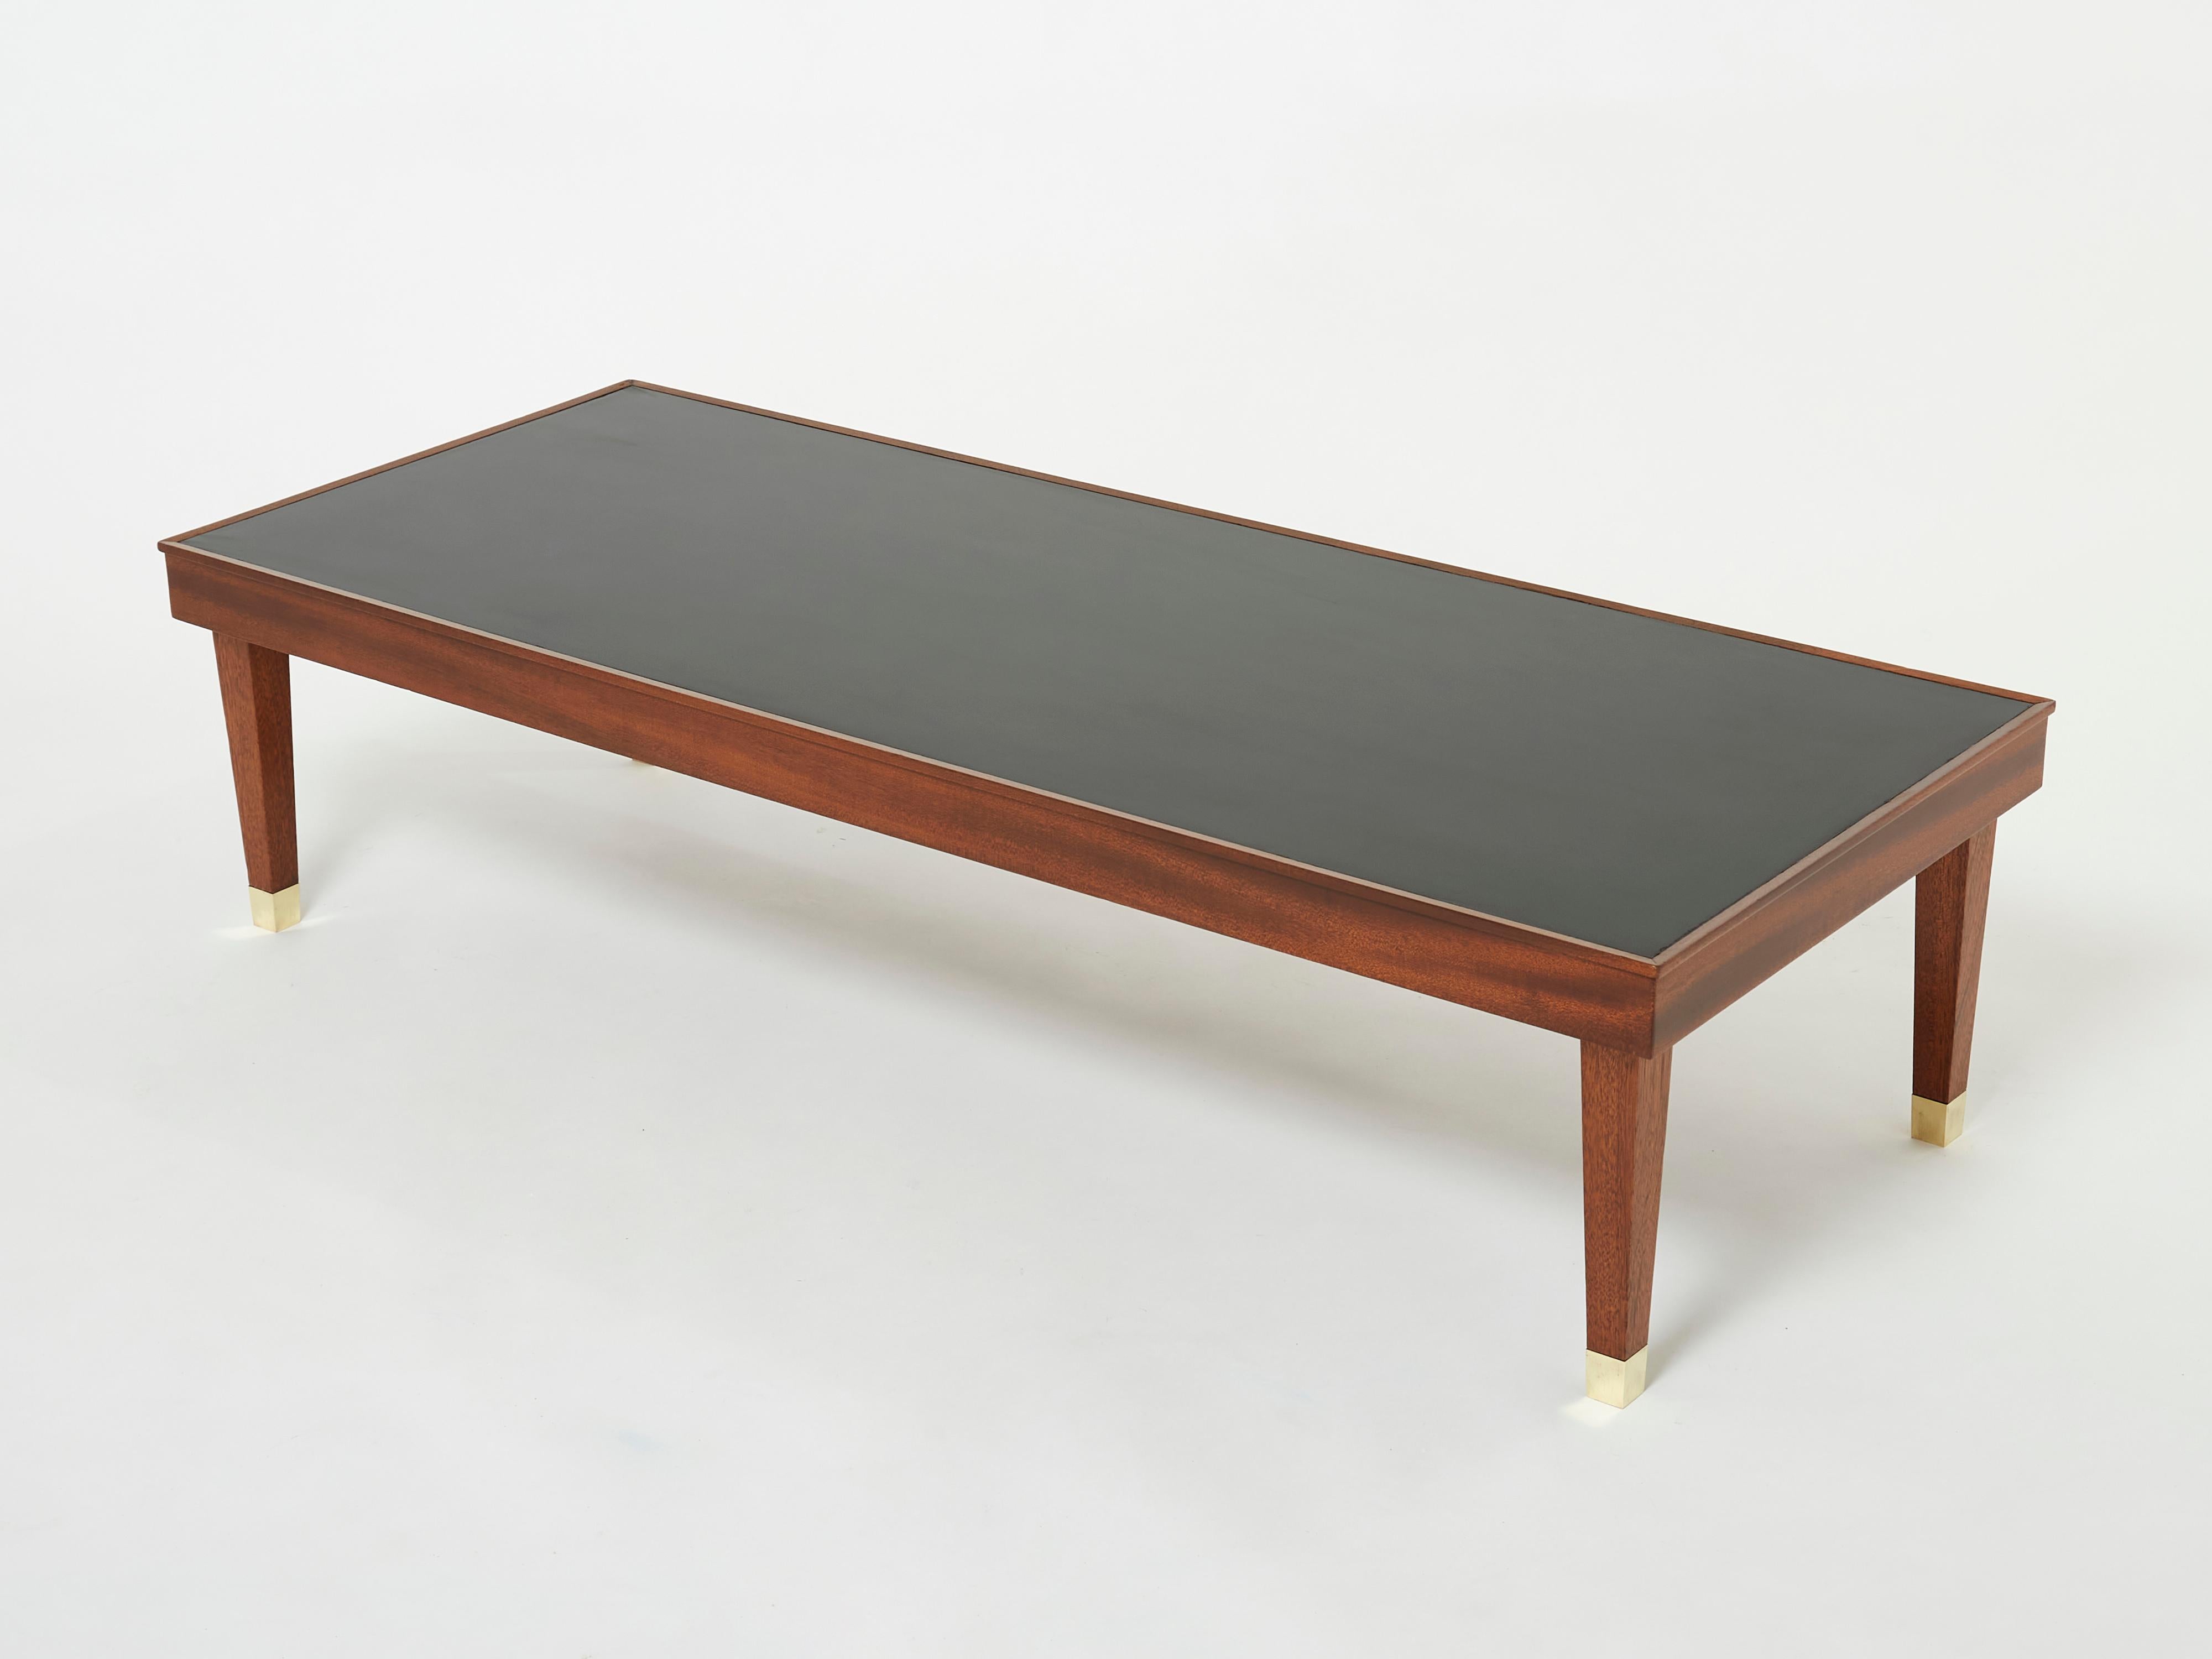 This elegant Jacques Adnet coffee table is sure to add an element of French modernisme to any room in your home. It was designed and produced by Jacques Adnet in the 1950s. With shapely solid mahogany wood structure, tapered legs, brass sabots and a